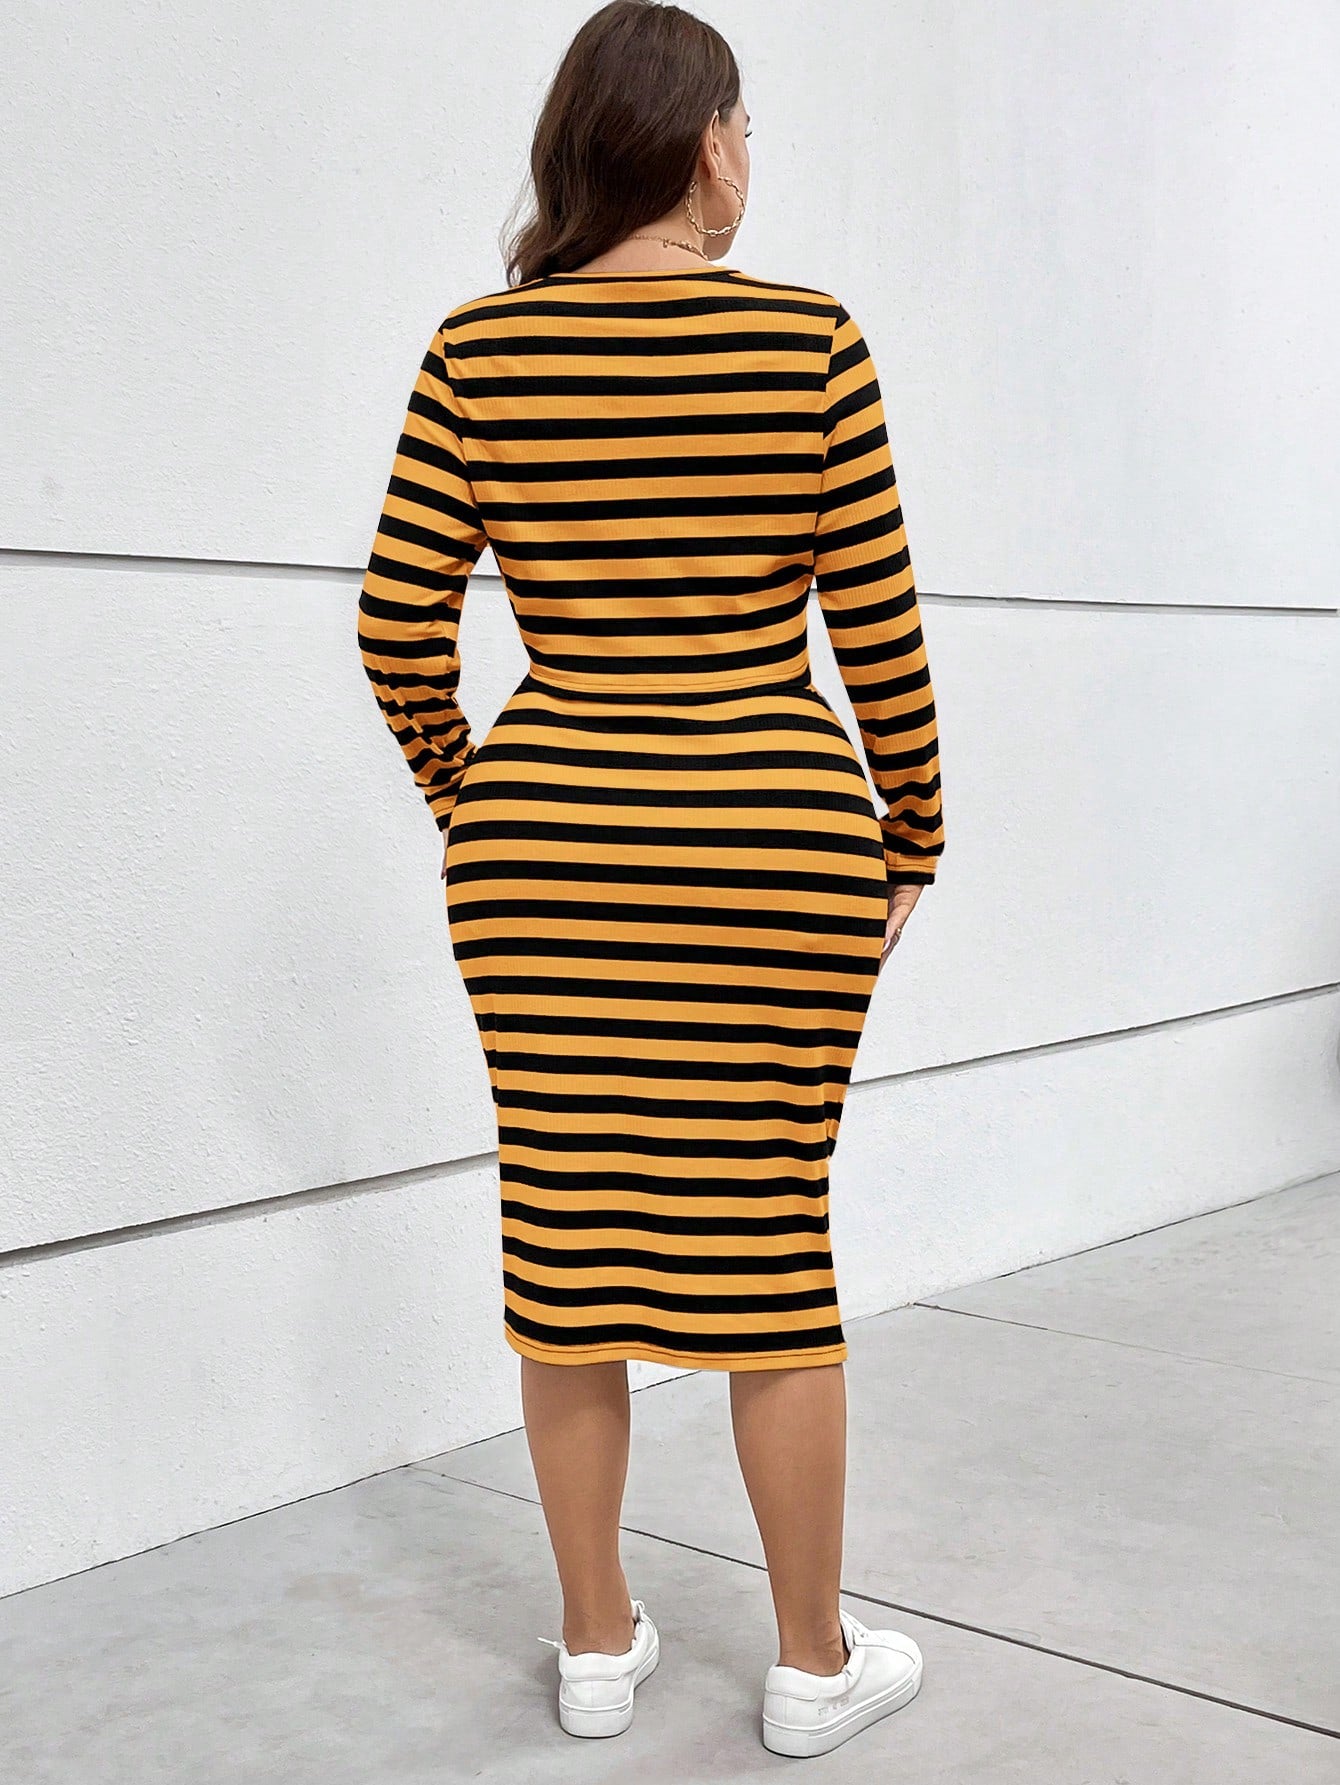 Women's Plus Size Striped Slim Fit Top And Skirt Set